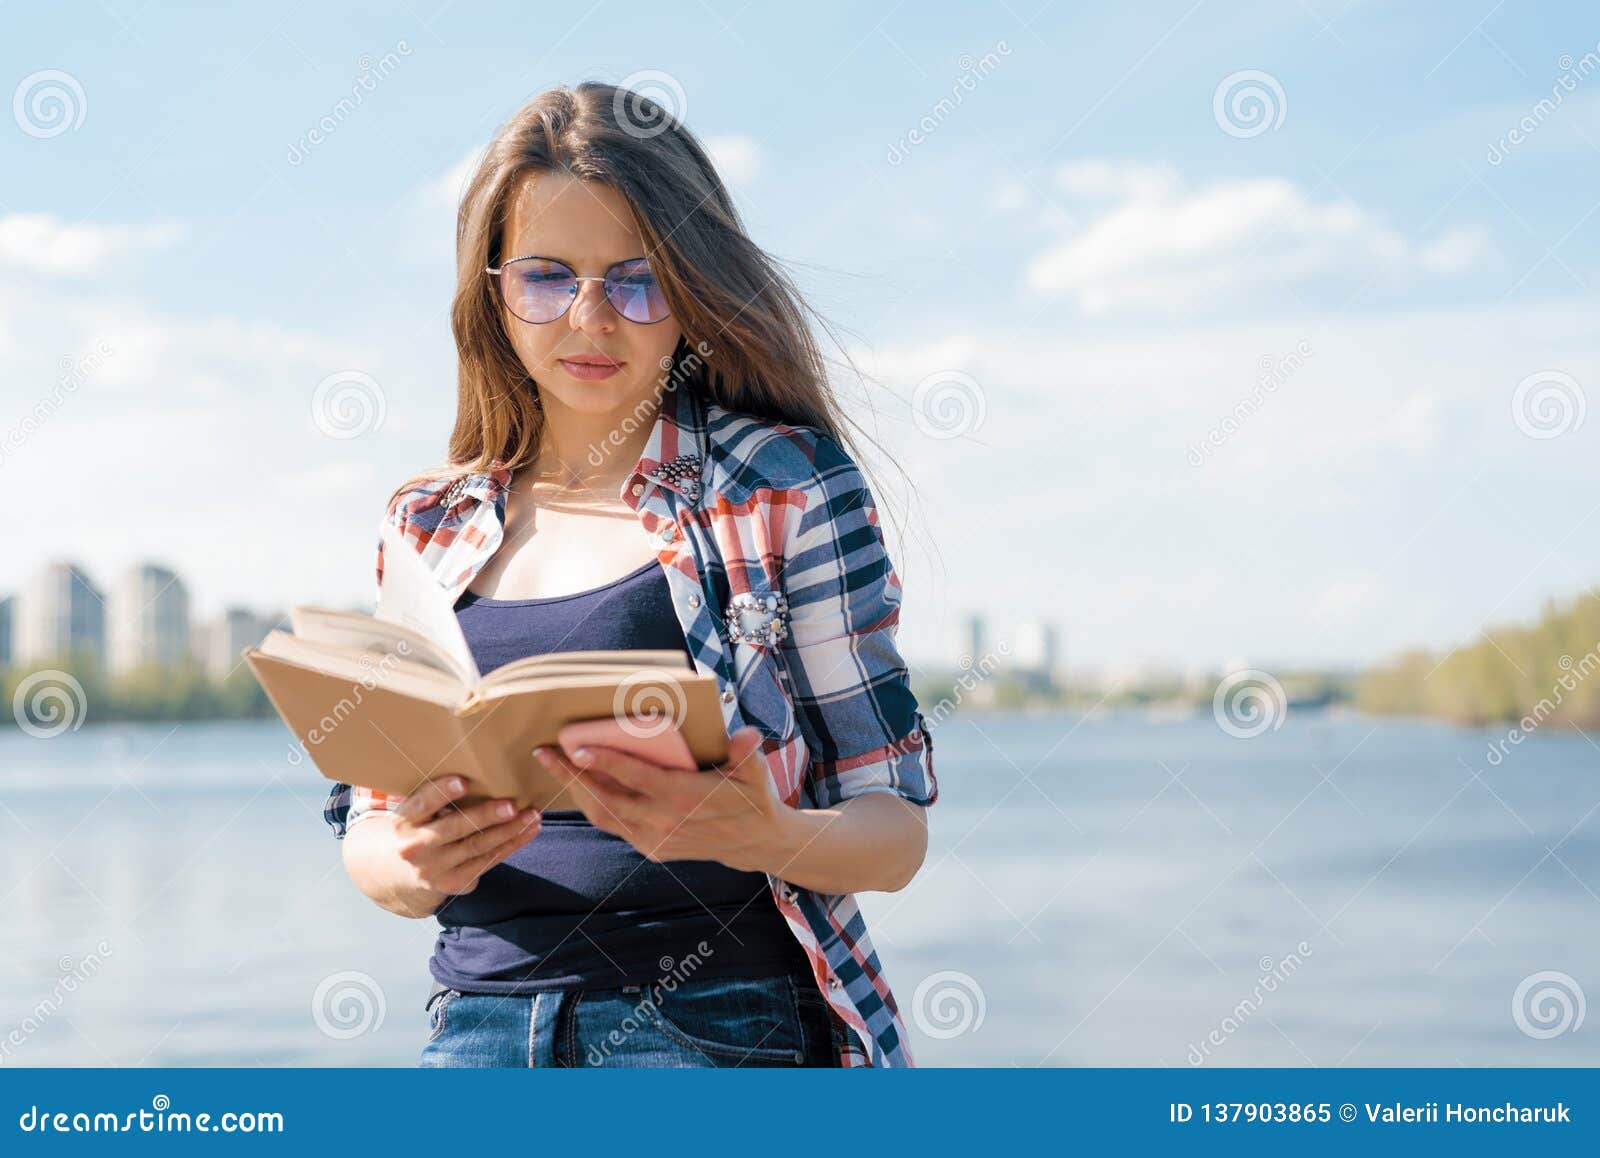 Outdoor Portrait Adult Woman Reading Book. Background Street, City ...